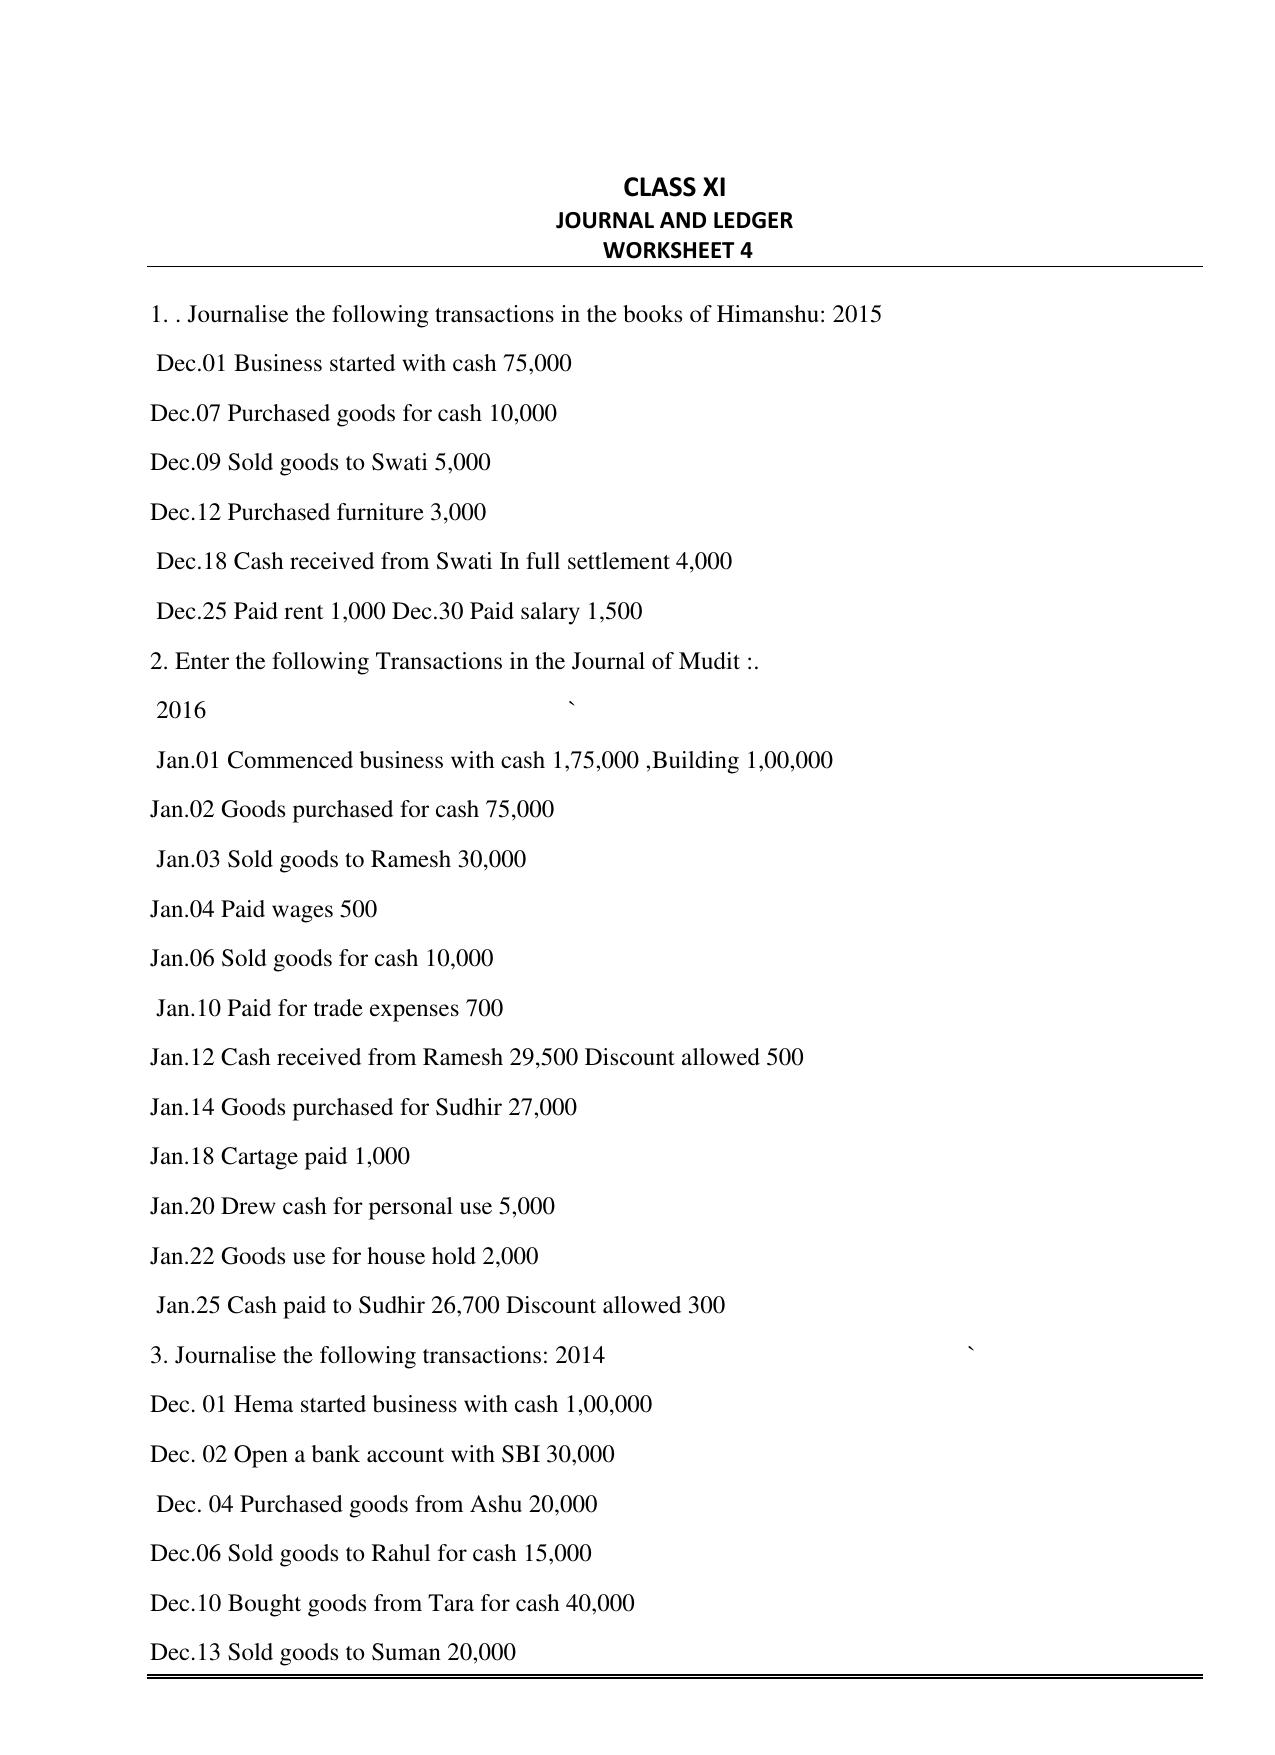 CBSE Worksheets for Class 11 Accountancy Journal and Ledger Assignment - Page 1